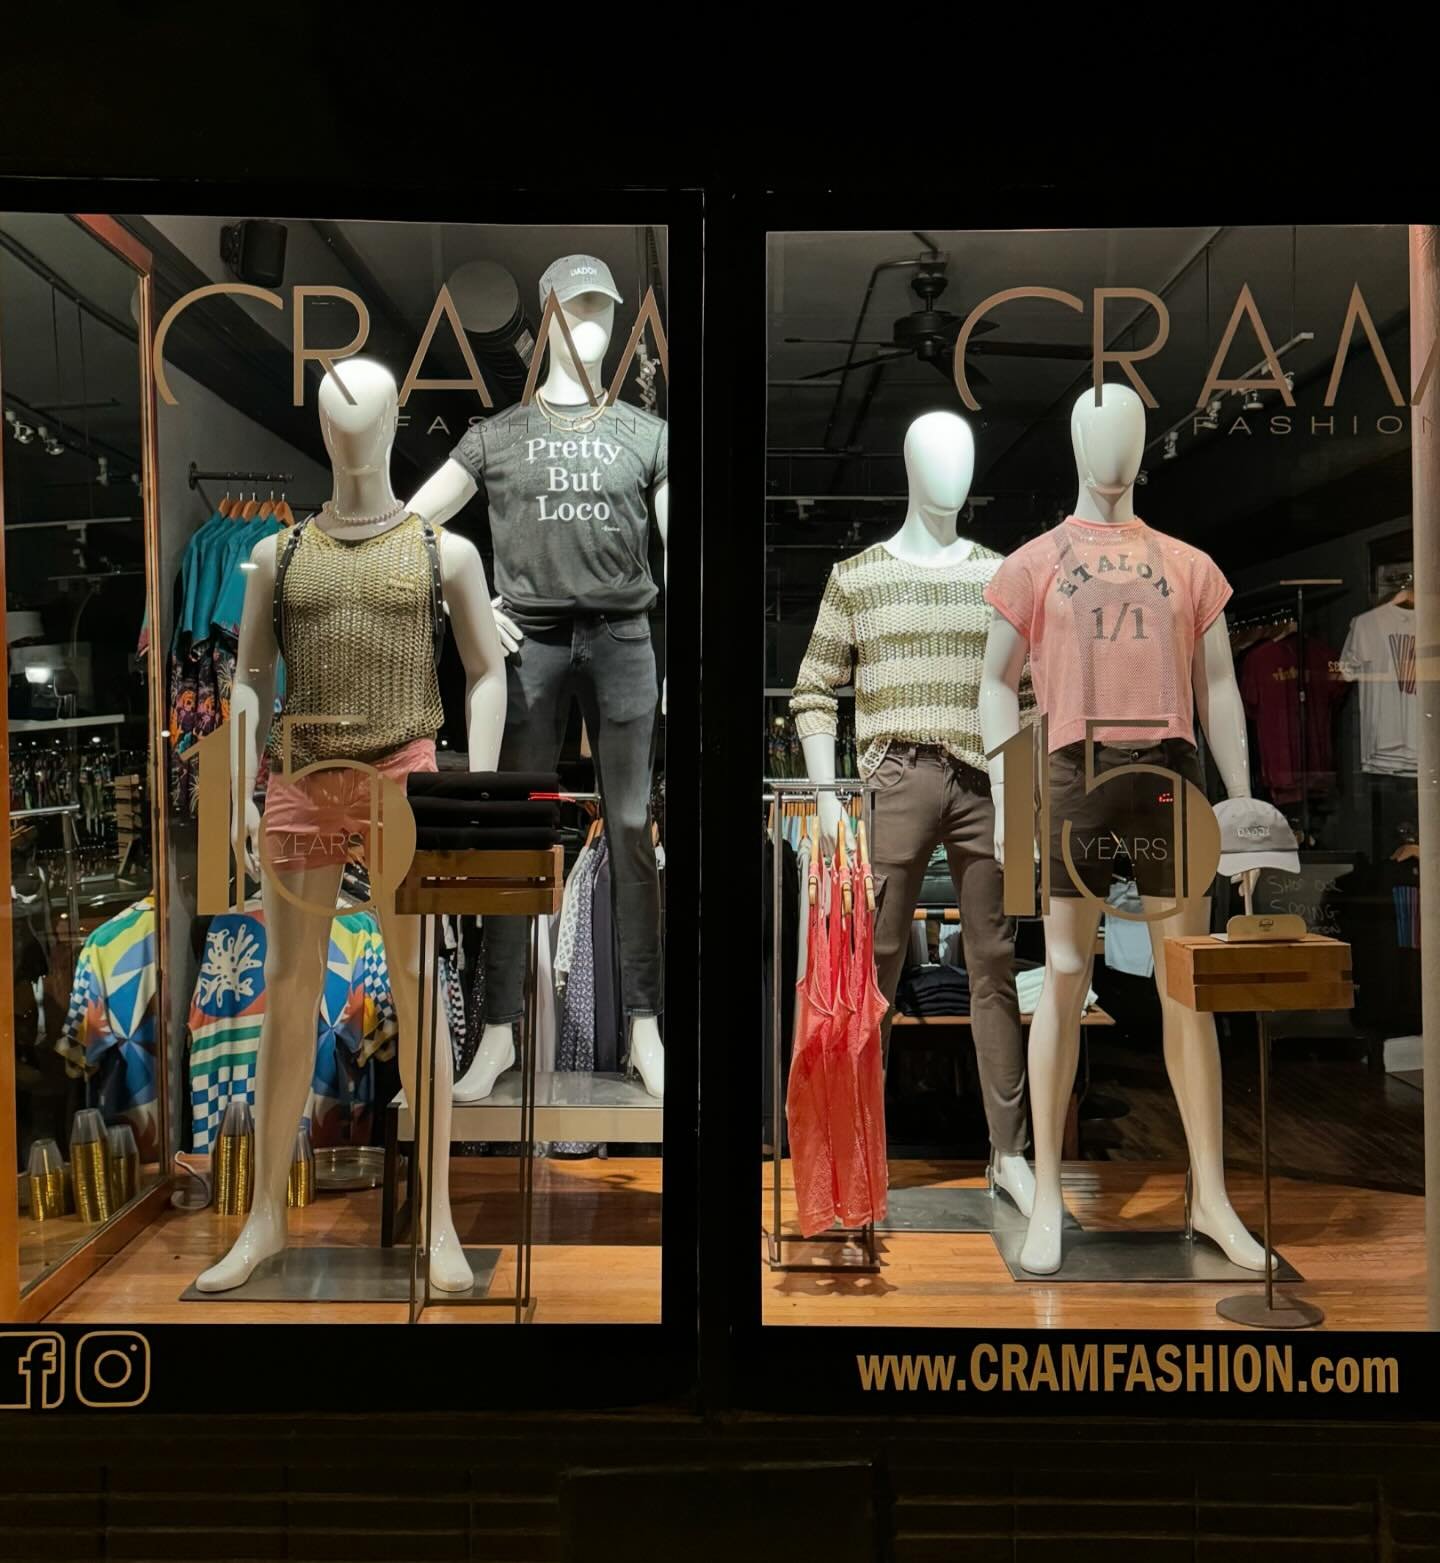 Time for a window update! The main feature is one of our newer brands, @etalonbysc, as well as other new products for Spring from @7diamonds, @loft604, @st33lebrand and more!